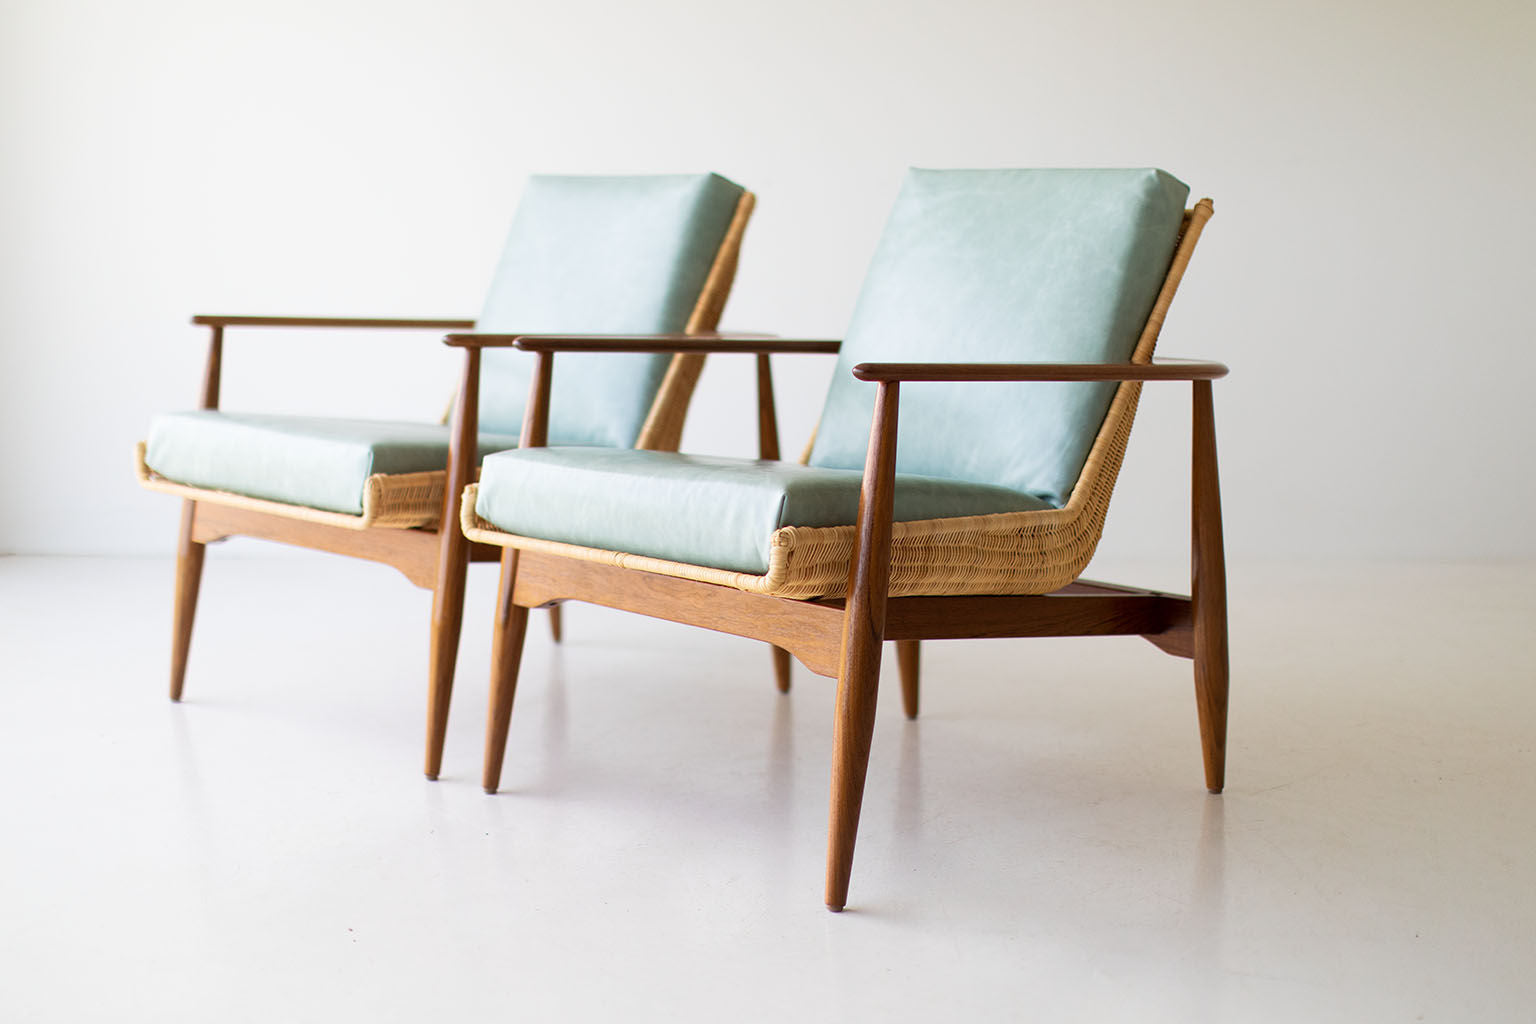 Lawrence Peabody Wicker Lounge Chairs in Leather for Craft Associates Furniture